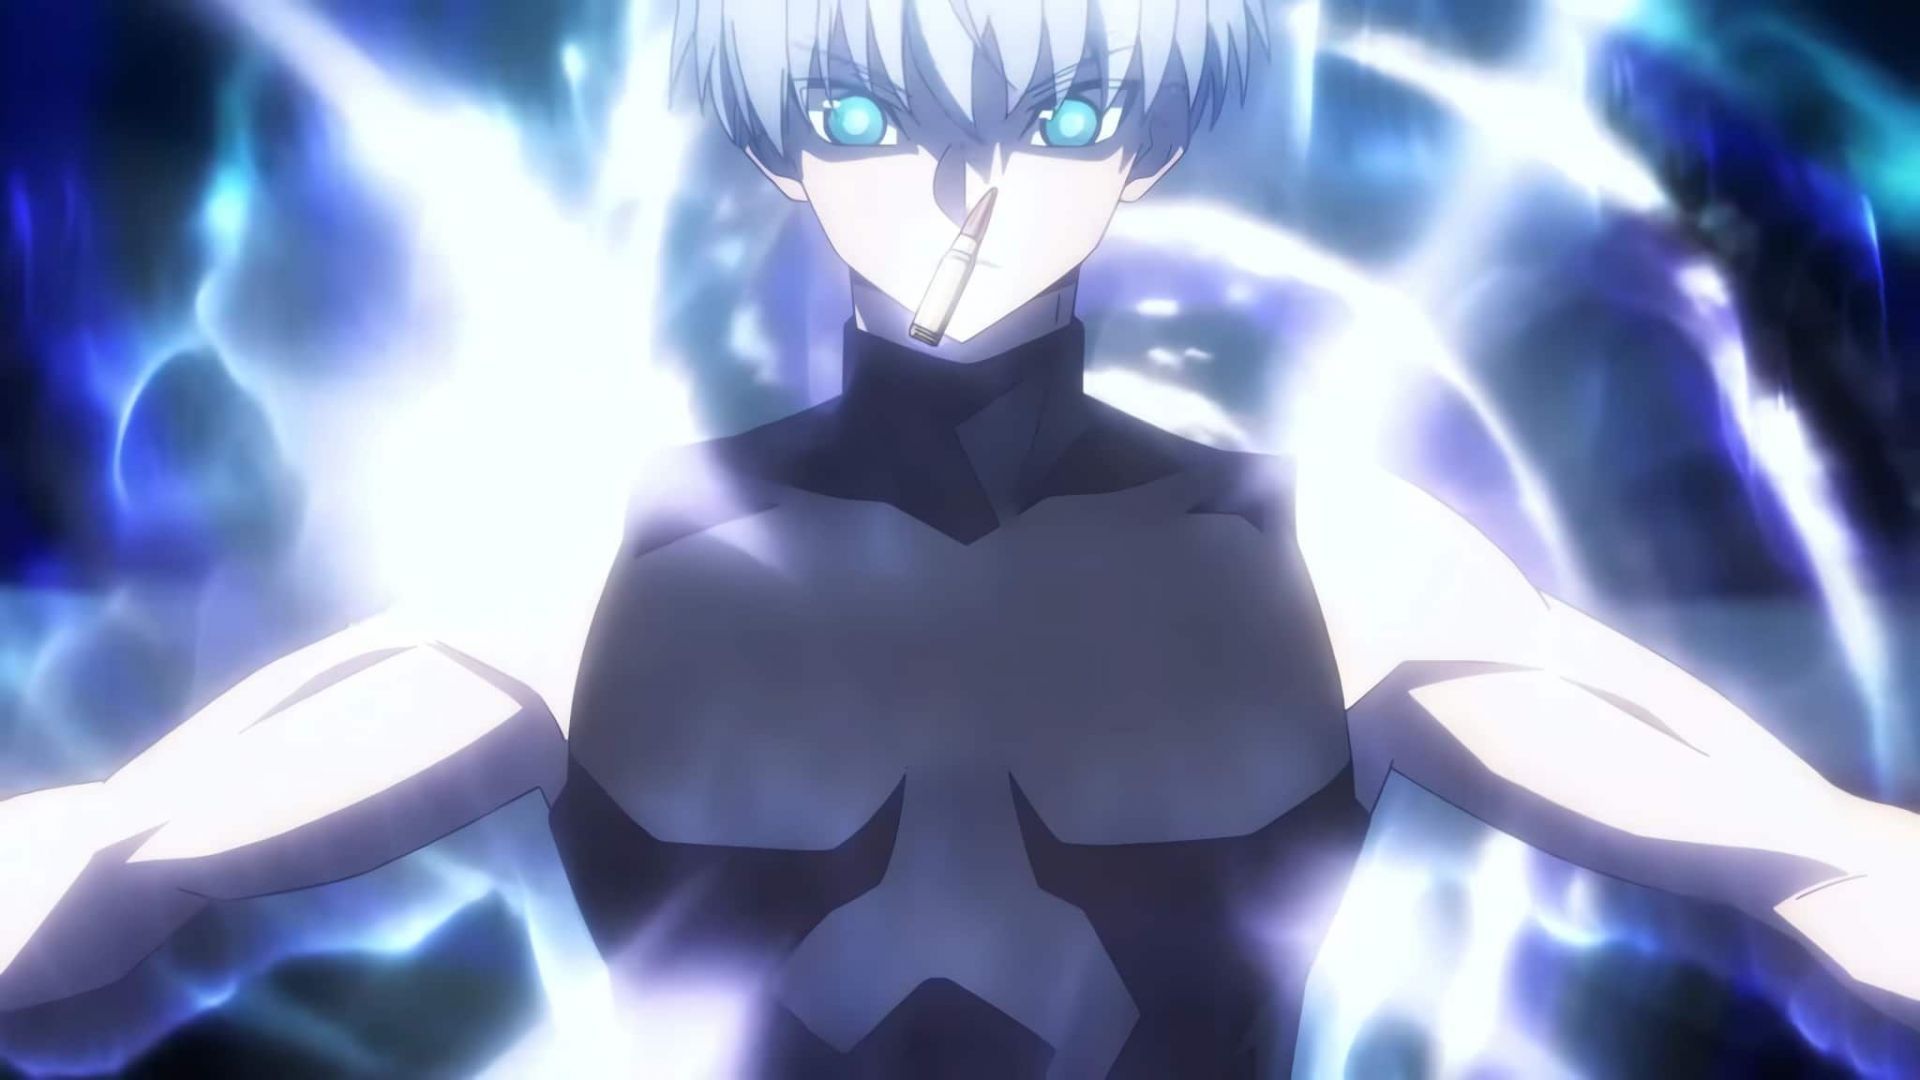 Ragna as seen in the anime series (Image via SILVER LINK)